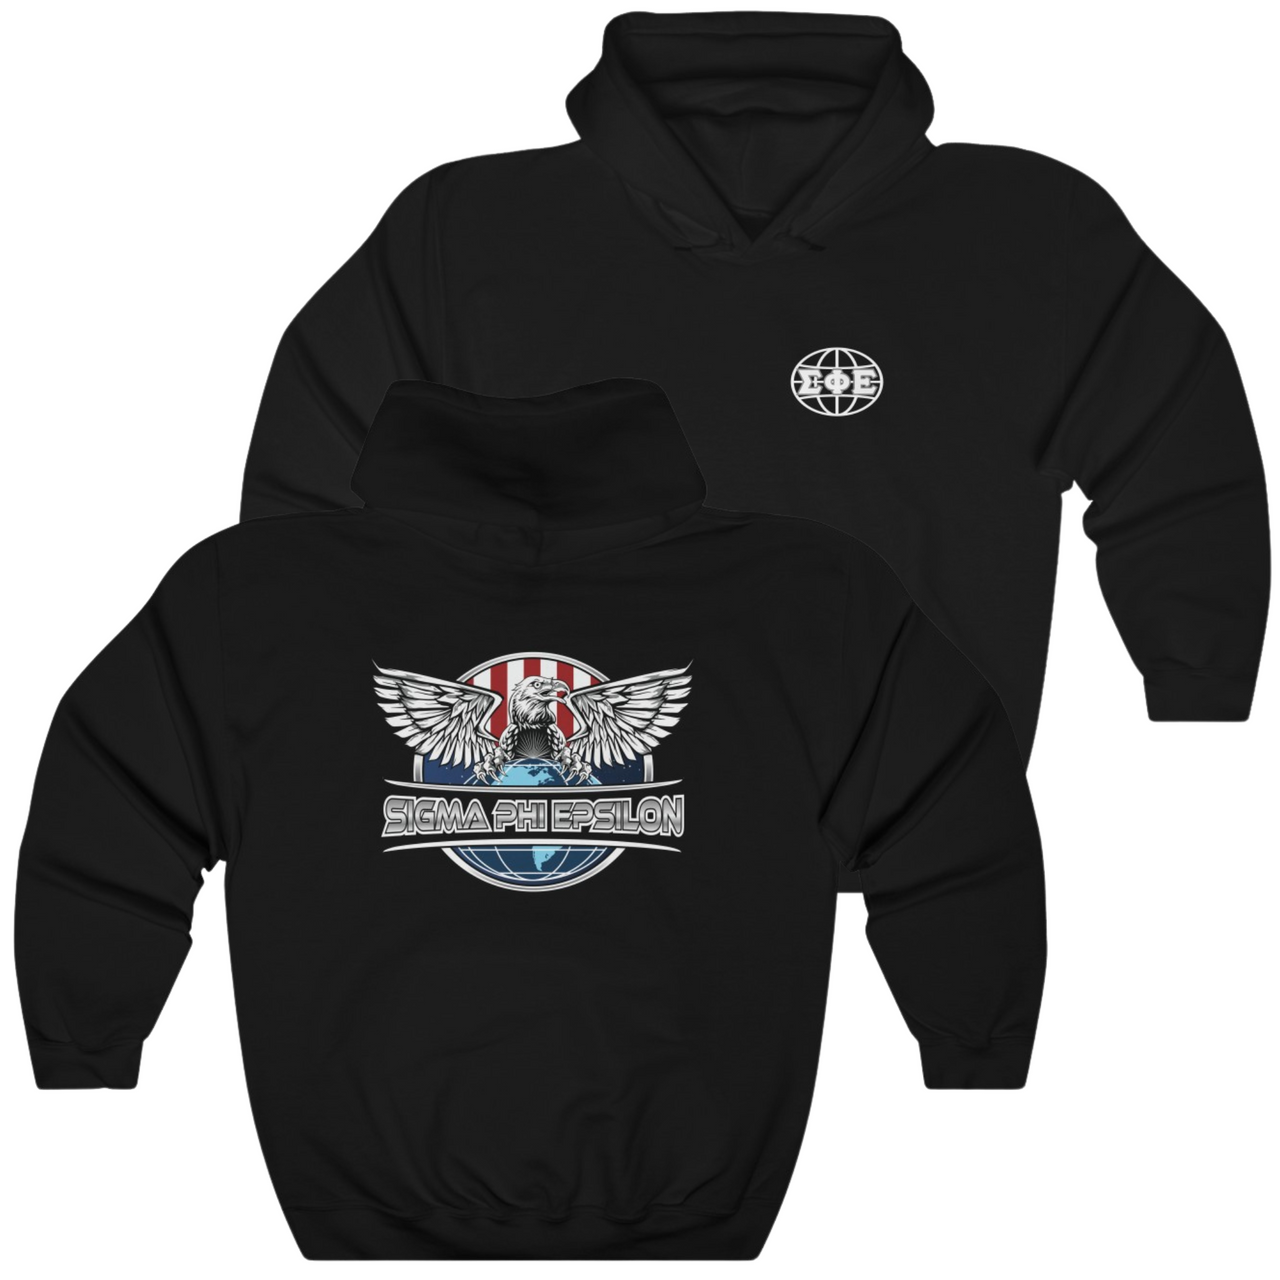 Black Sigma Phi Epsilon Graphic Hoodie | The Fraternal Order | SigEp Fraternity Clothes and Merchandise